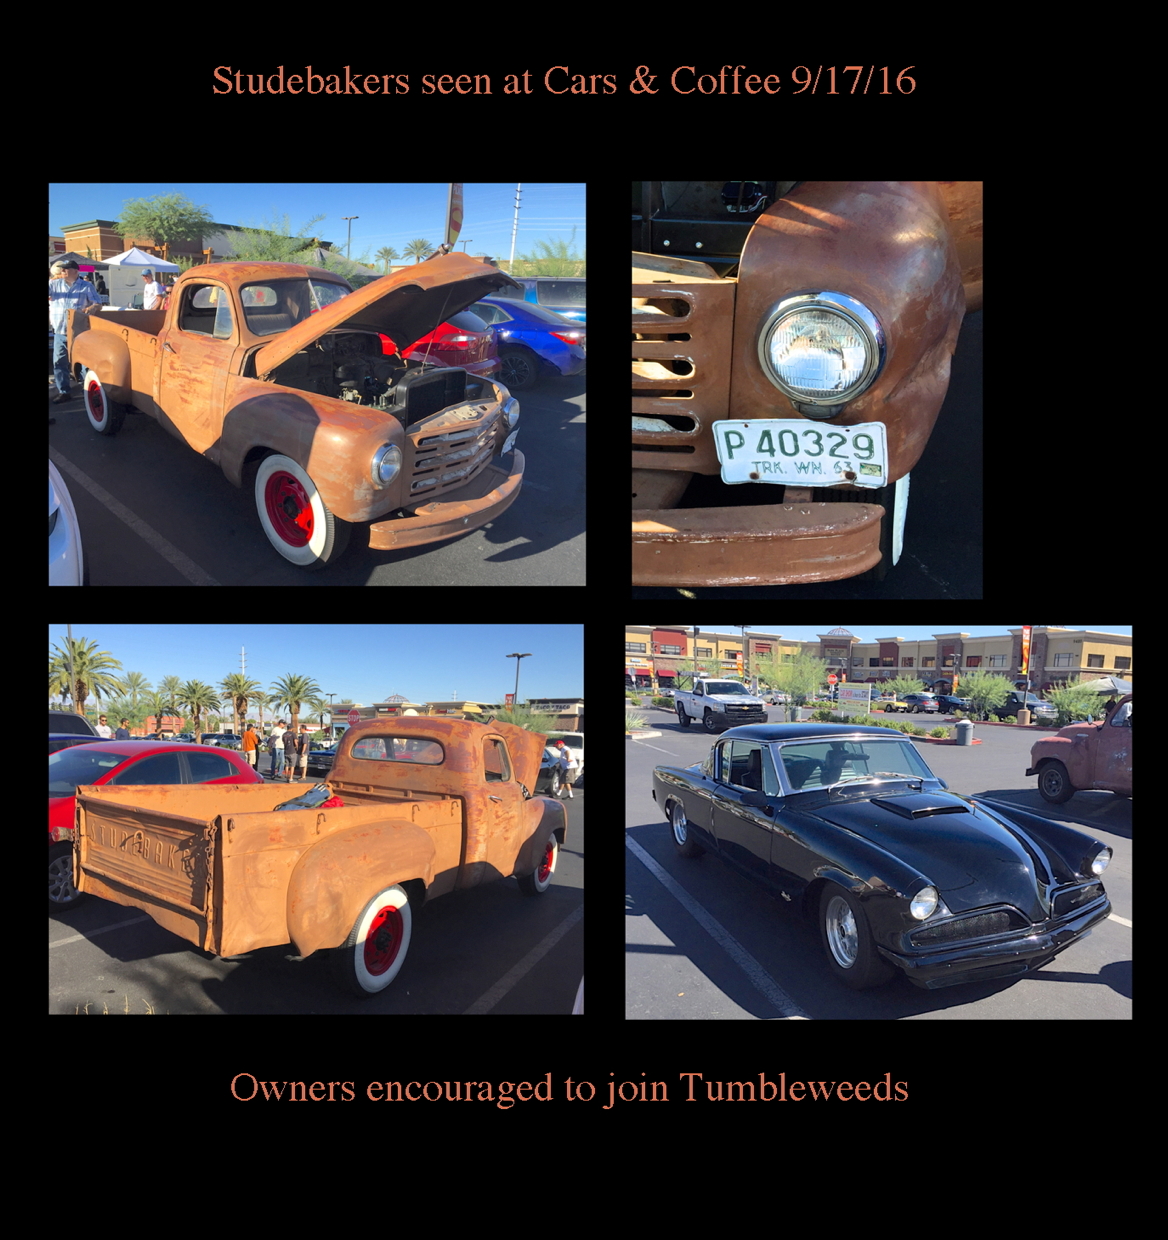 Cars and Coffe 9:17:16